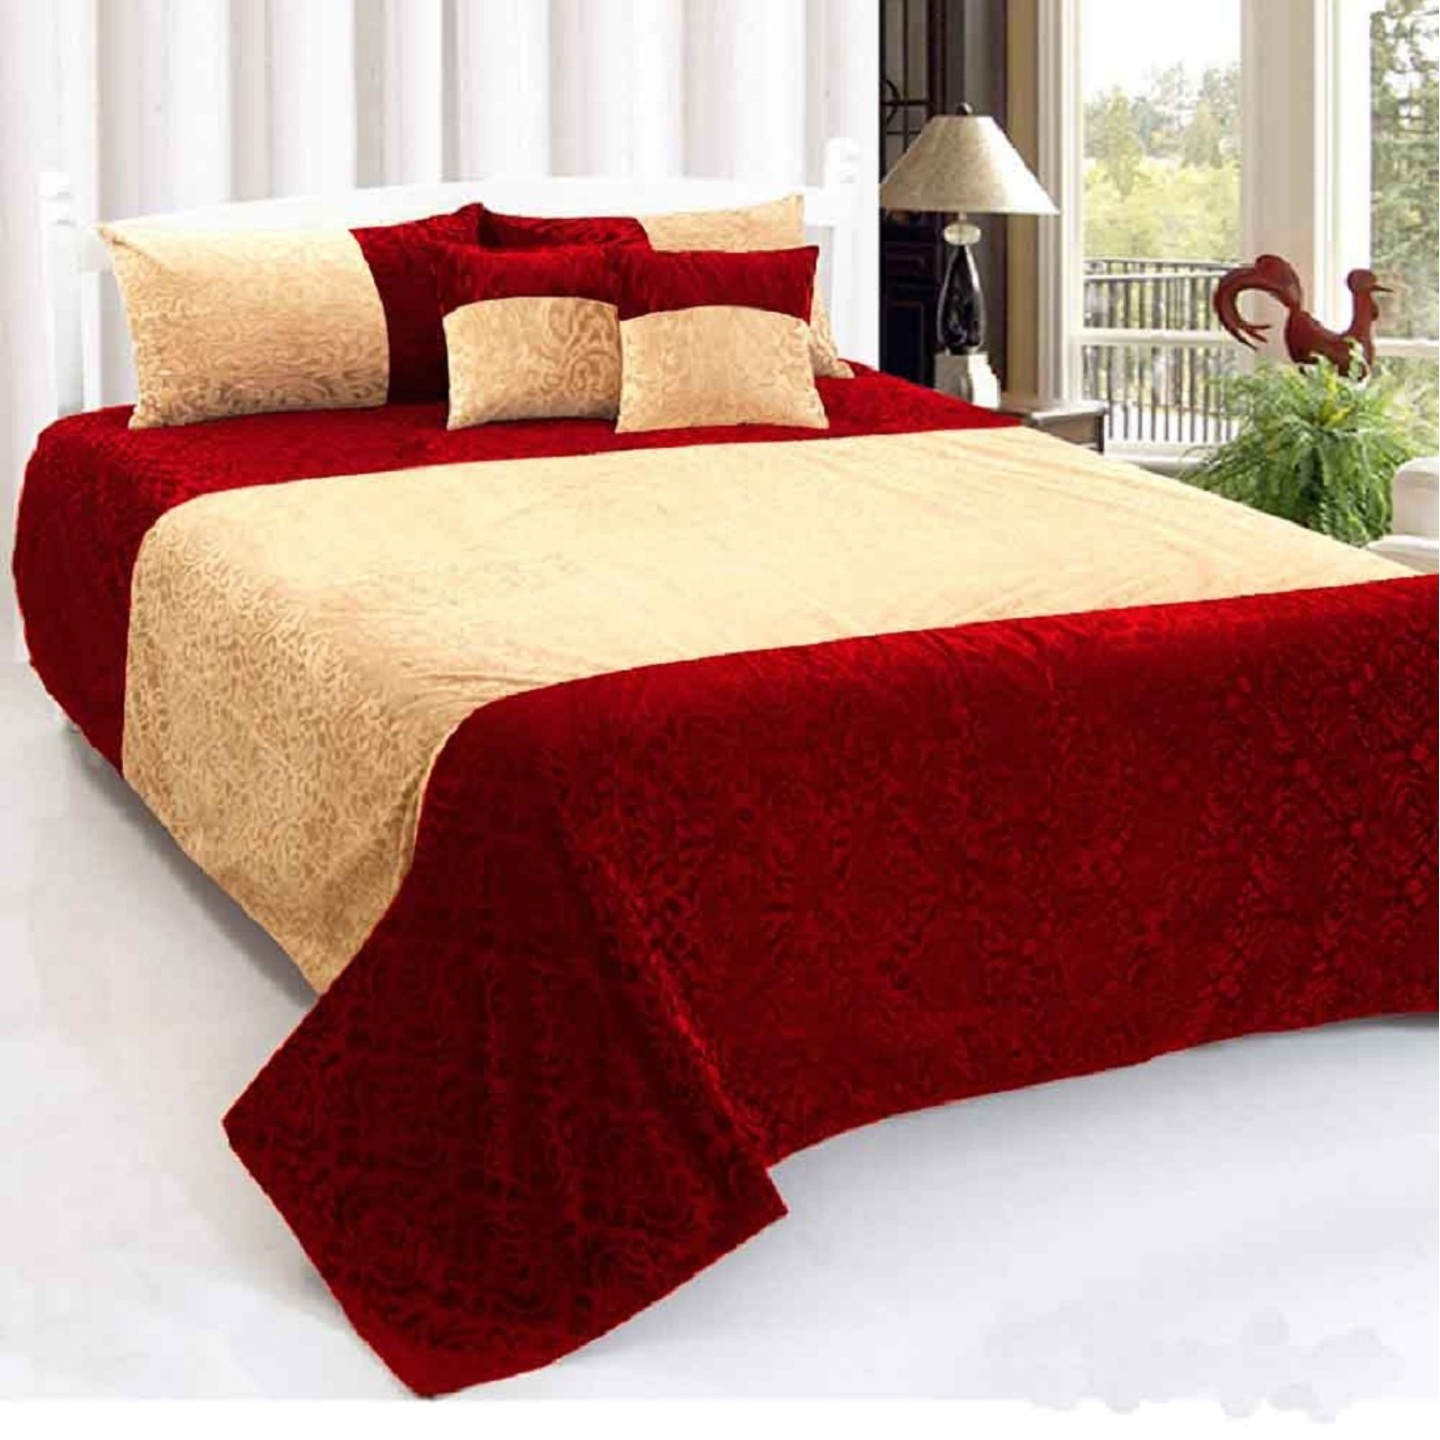 Handtex Home Maroon - Beige Velvet Double Bedsheet,2 cushion cover and 2 pillow cover)